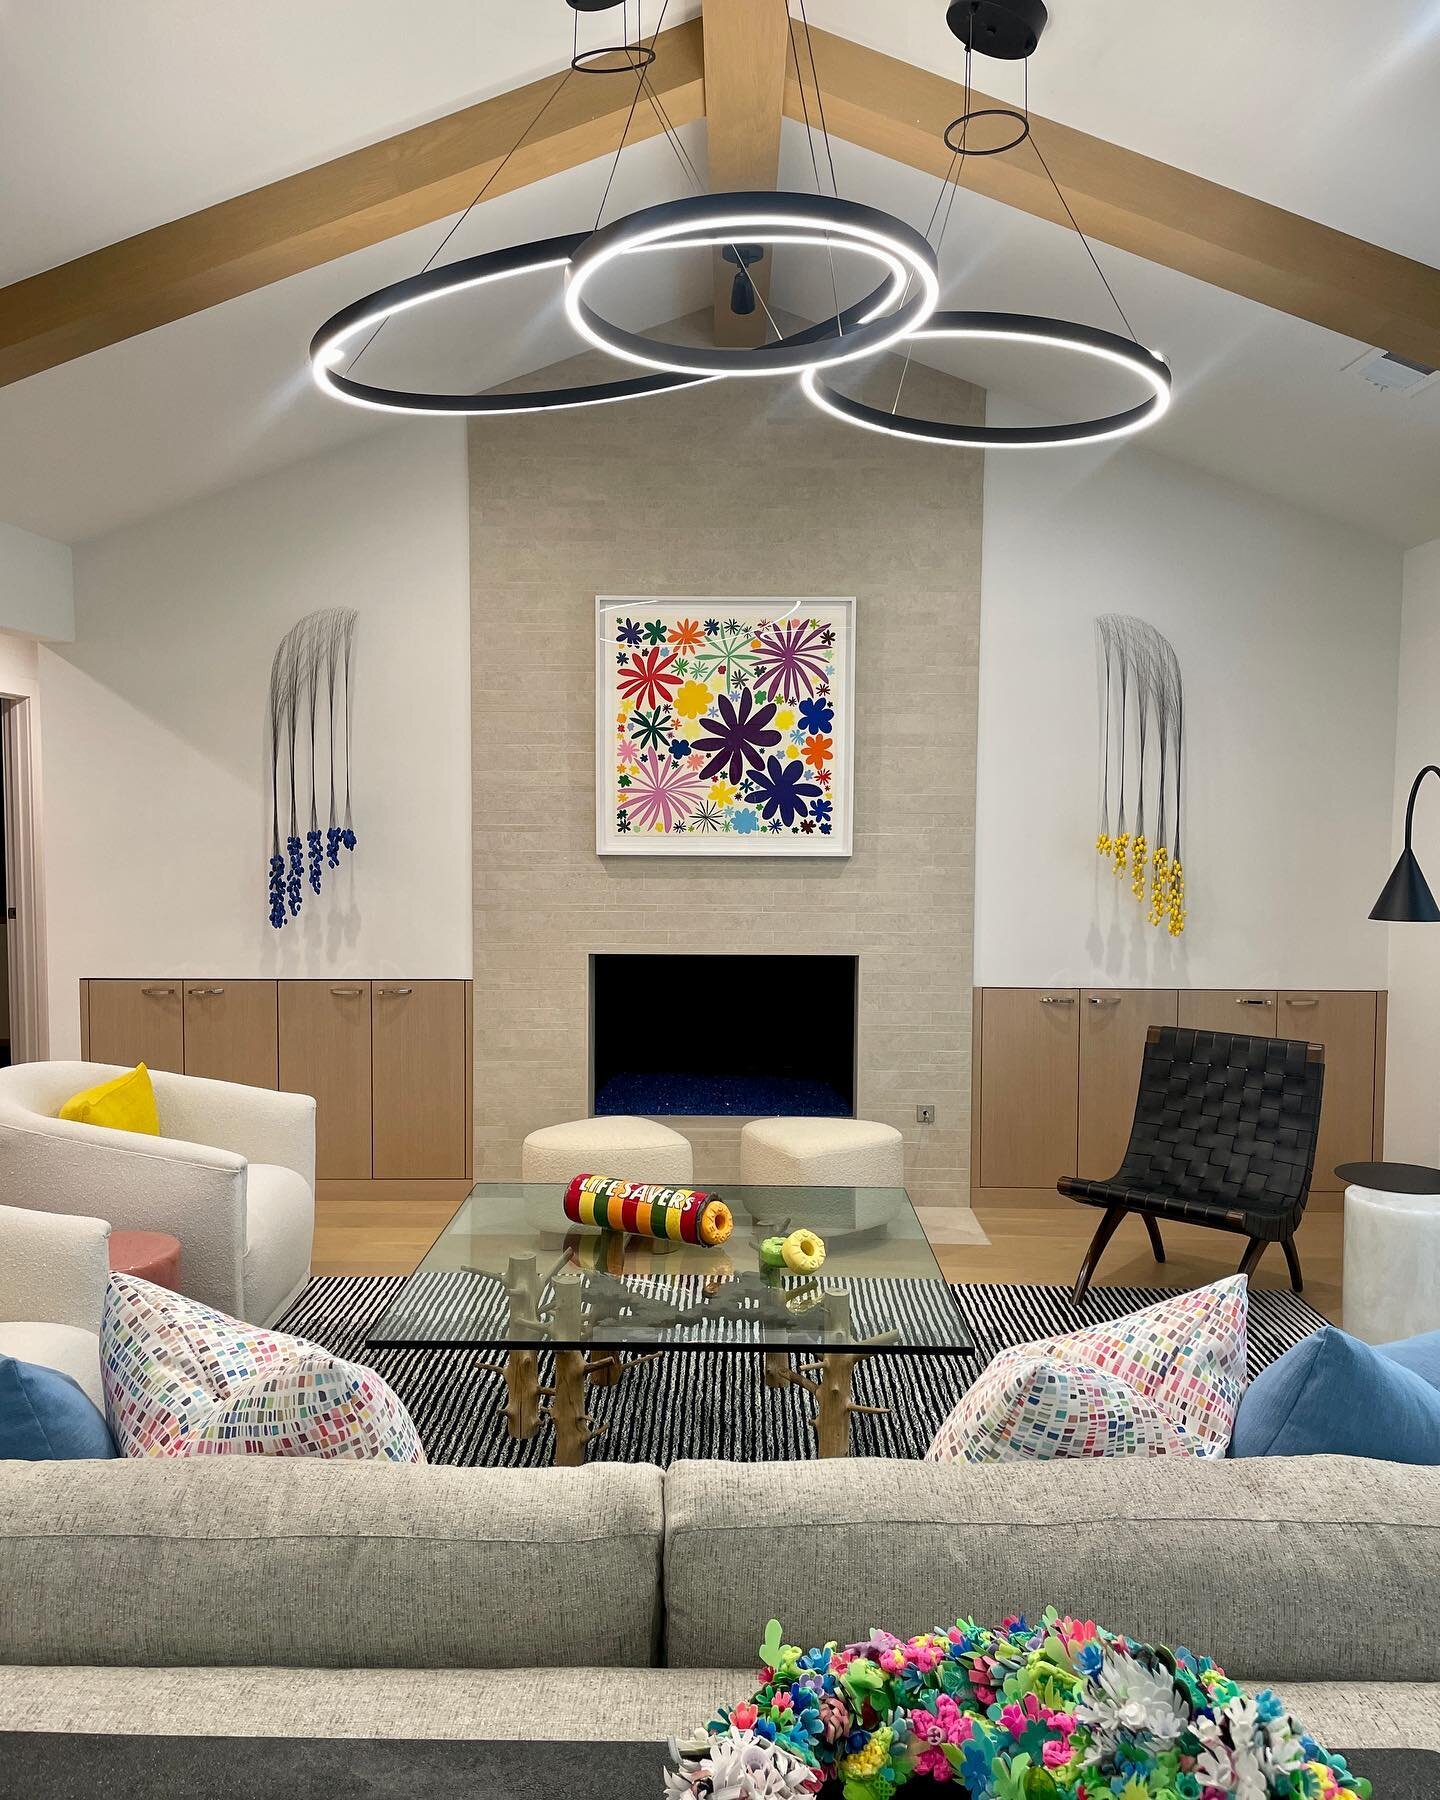 We had the privilege of installing two works by Du Chau in our client&rsquo;s beautiful home recently. Chau is in good company alongside a collection of contemporary art full of bright colors, movement, and dimension. 

Du Chau will have a work featu